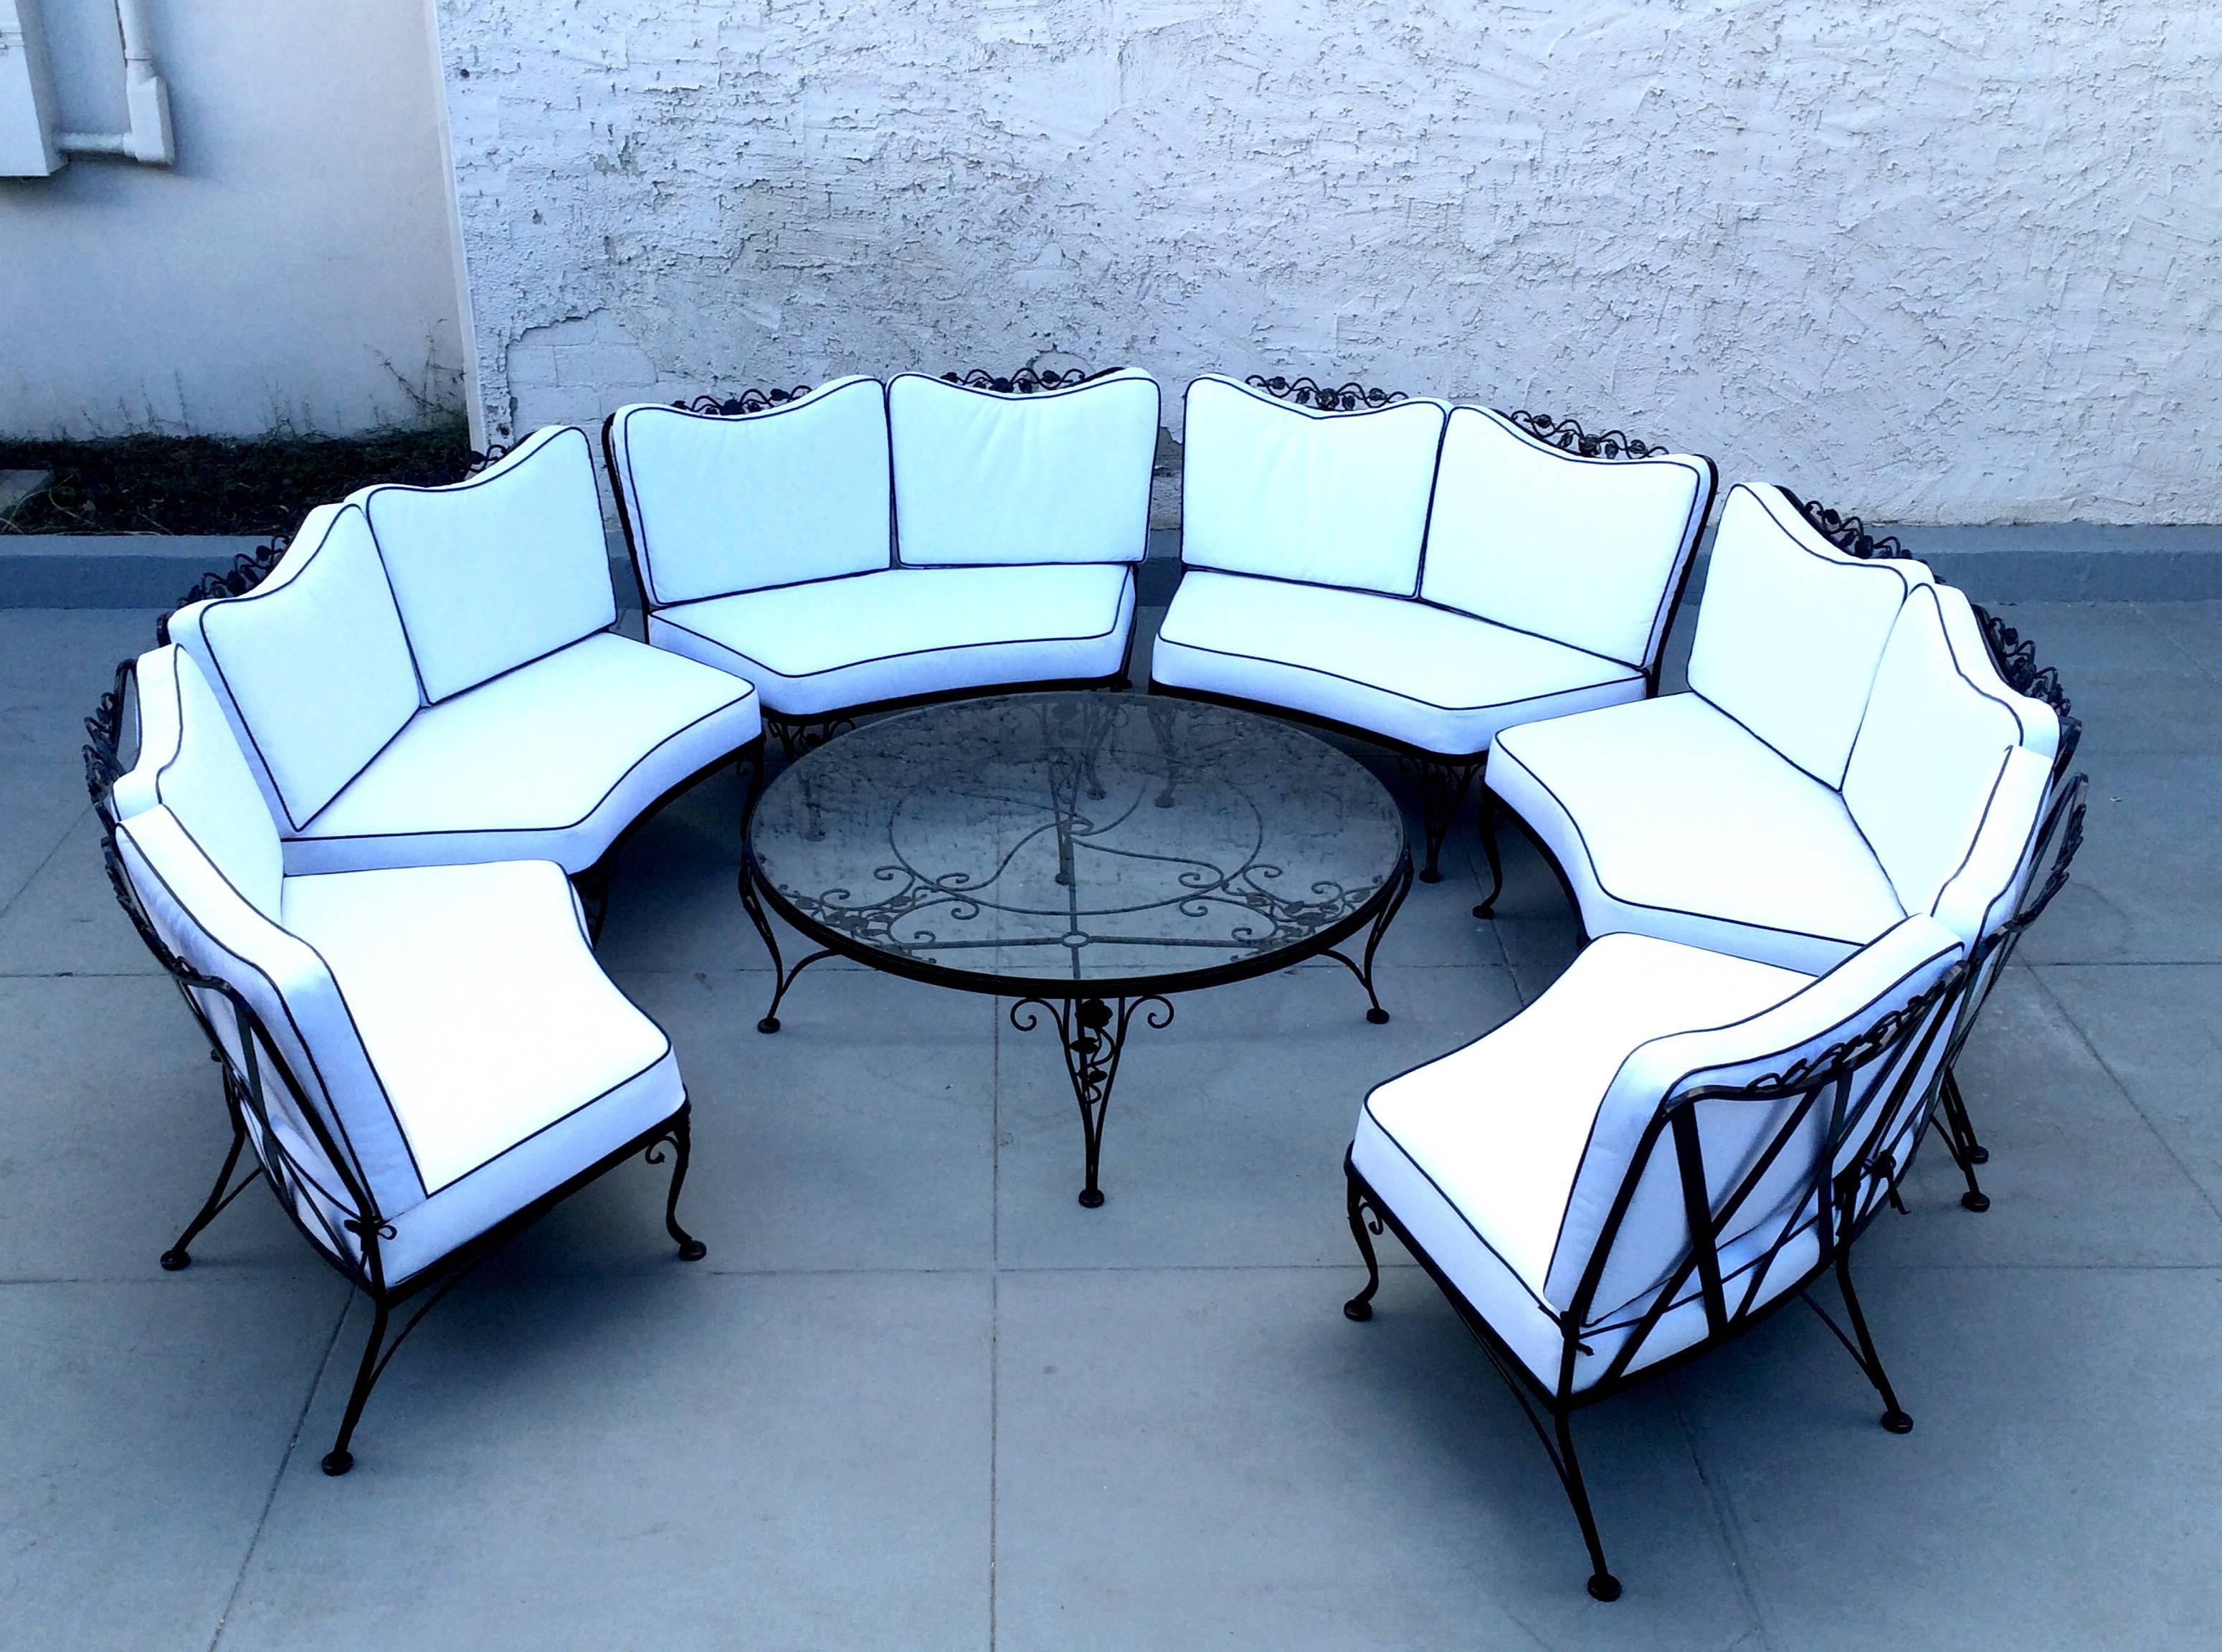 wrought iron sectional patio furniture